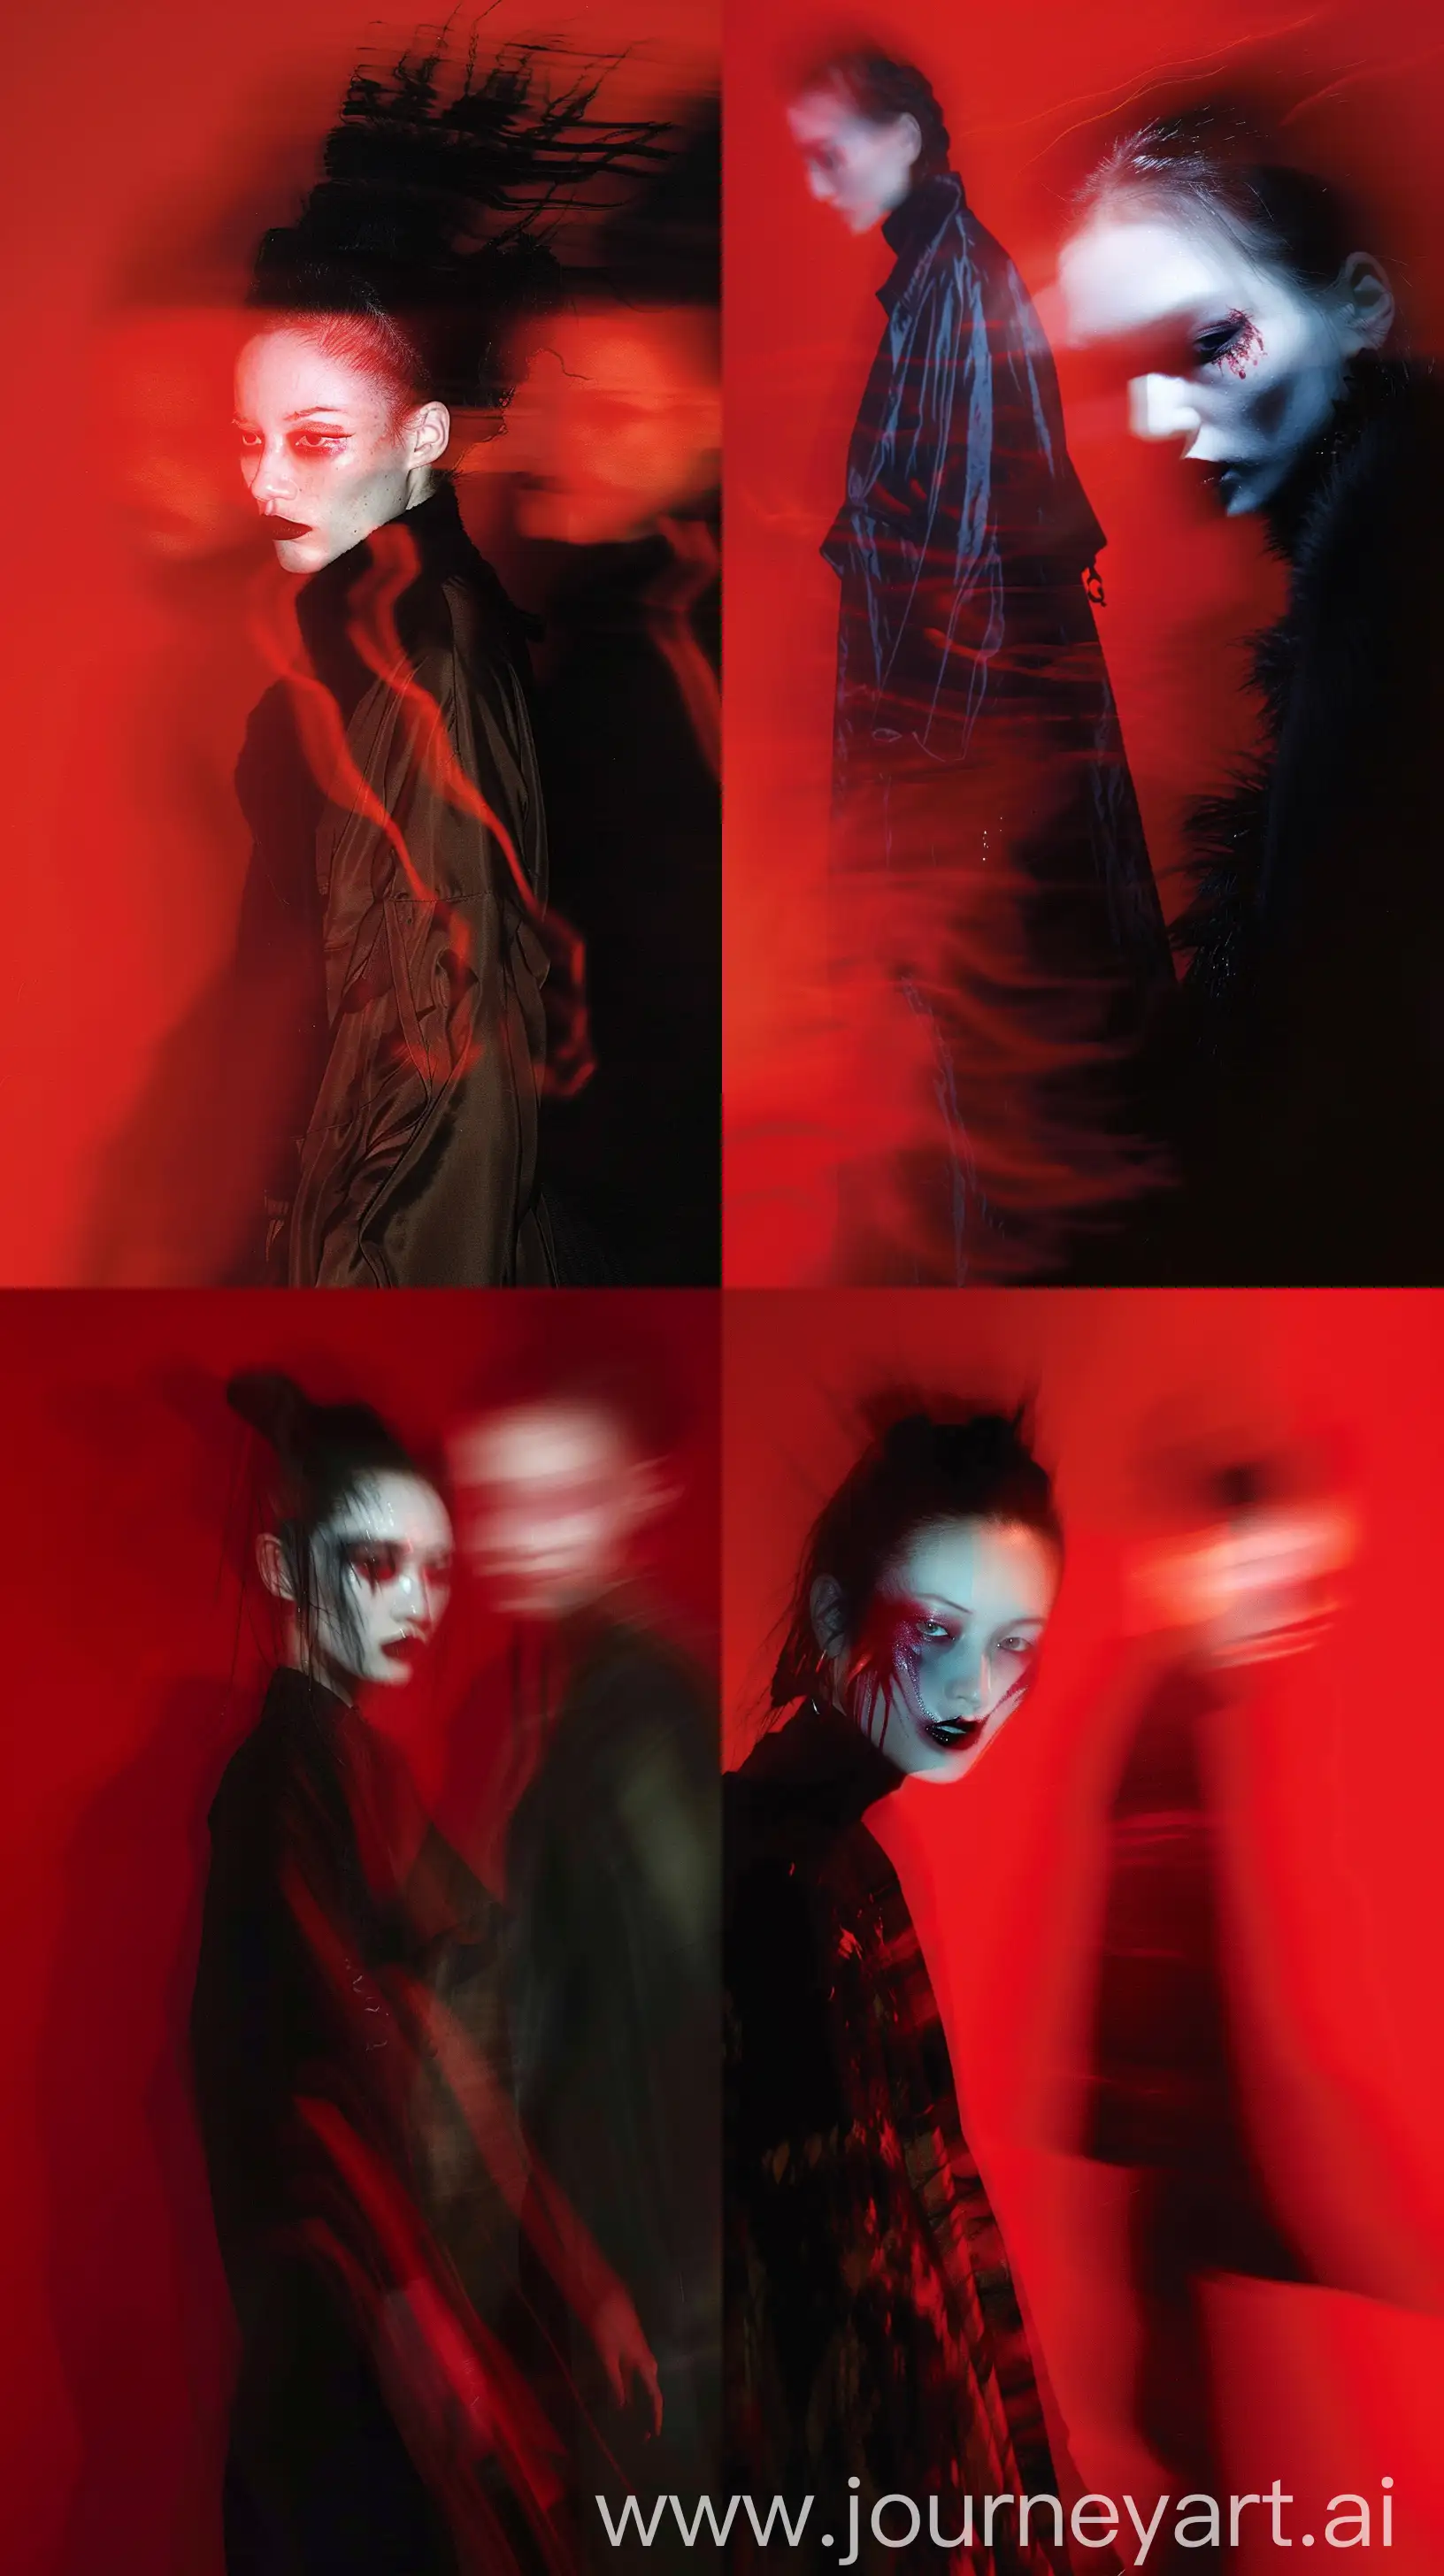 Ethereal-Balenciaga-Fashion-Haunting-Nocturnal-Scene-with-Blurred-Female-Figures